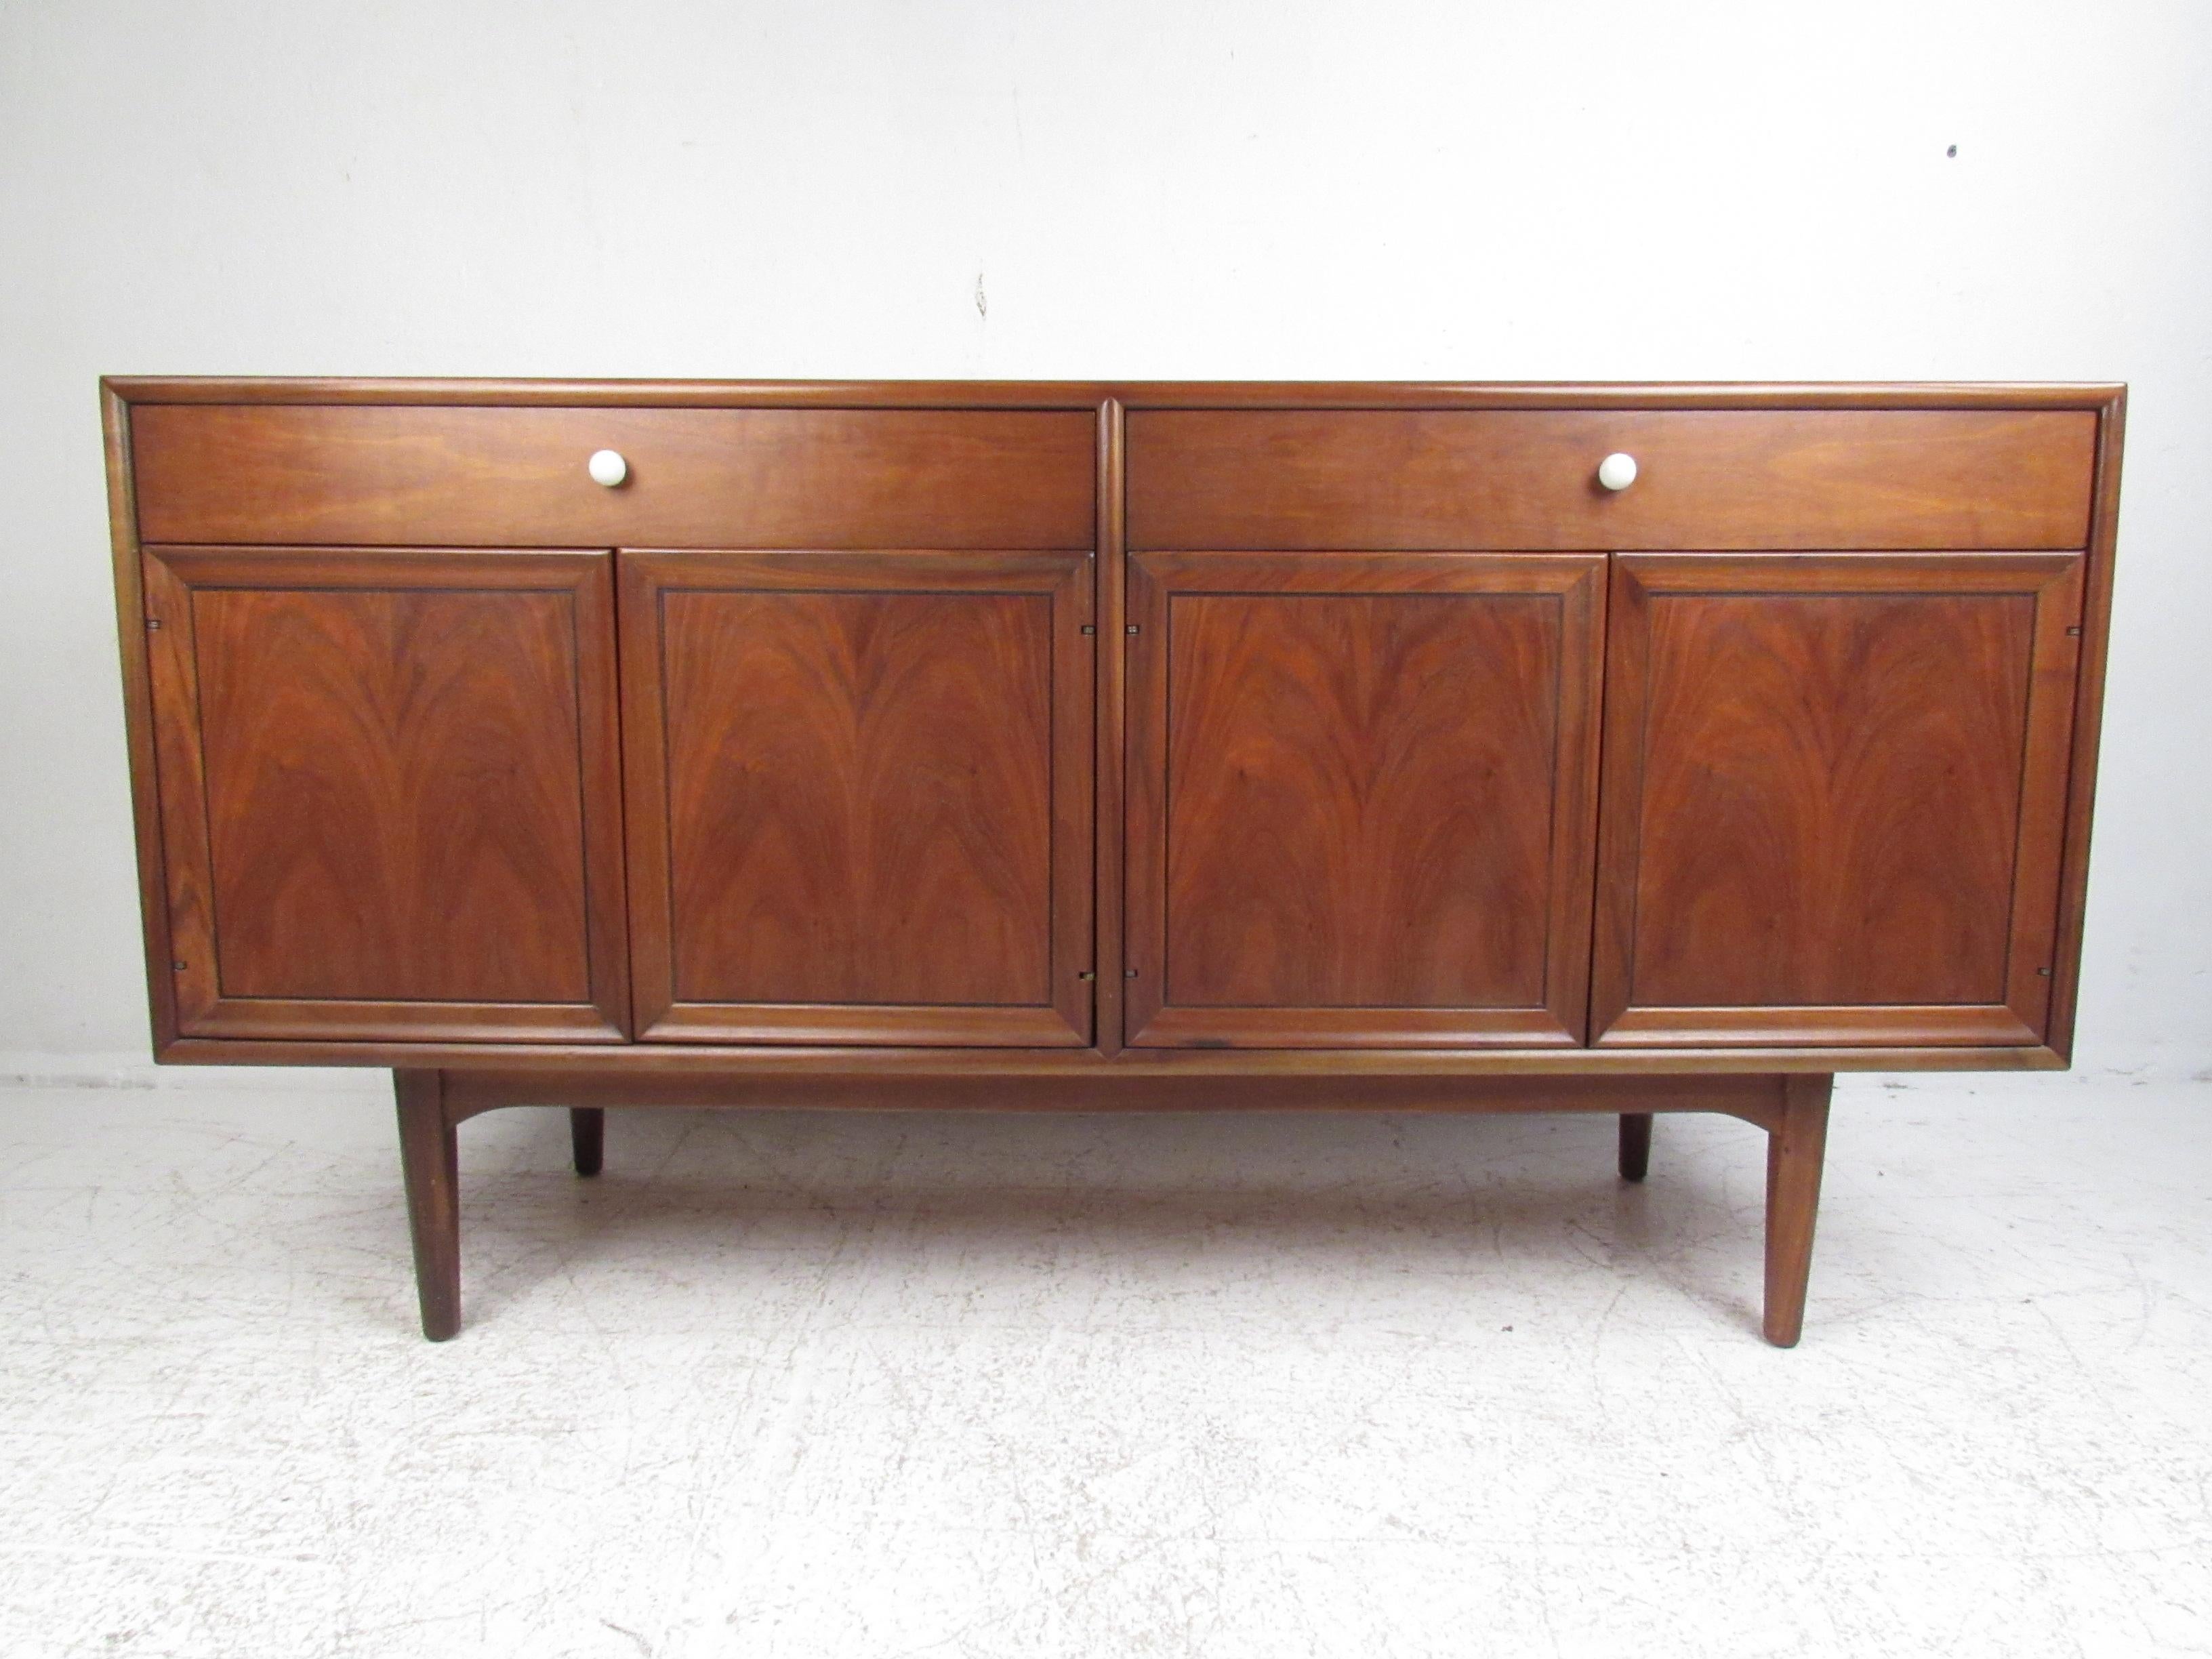 A stunning vintage modern Drexel Declaration buffet Credenza by Kipp Stewart and Stewart McDougall. This stylish case piece features book-matched black walnut wood grains highlighted by their iconic white porcelain pulls. The versatile design is